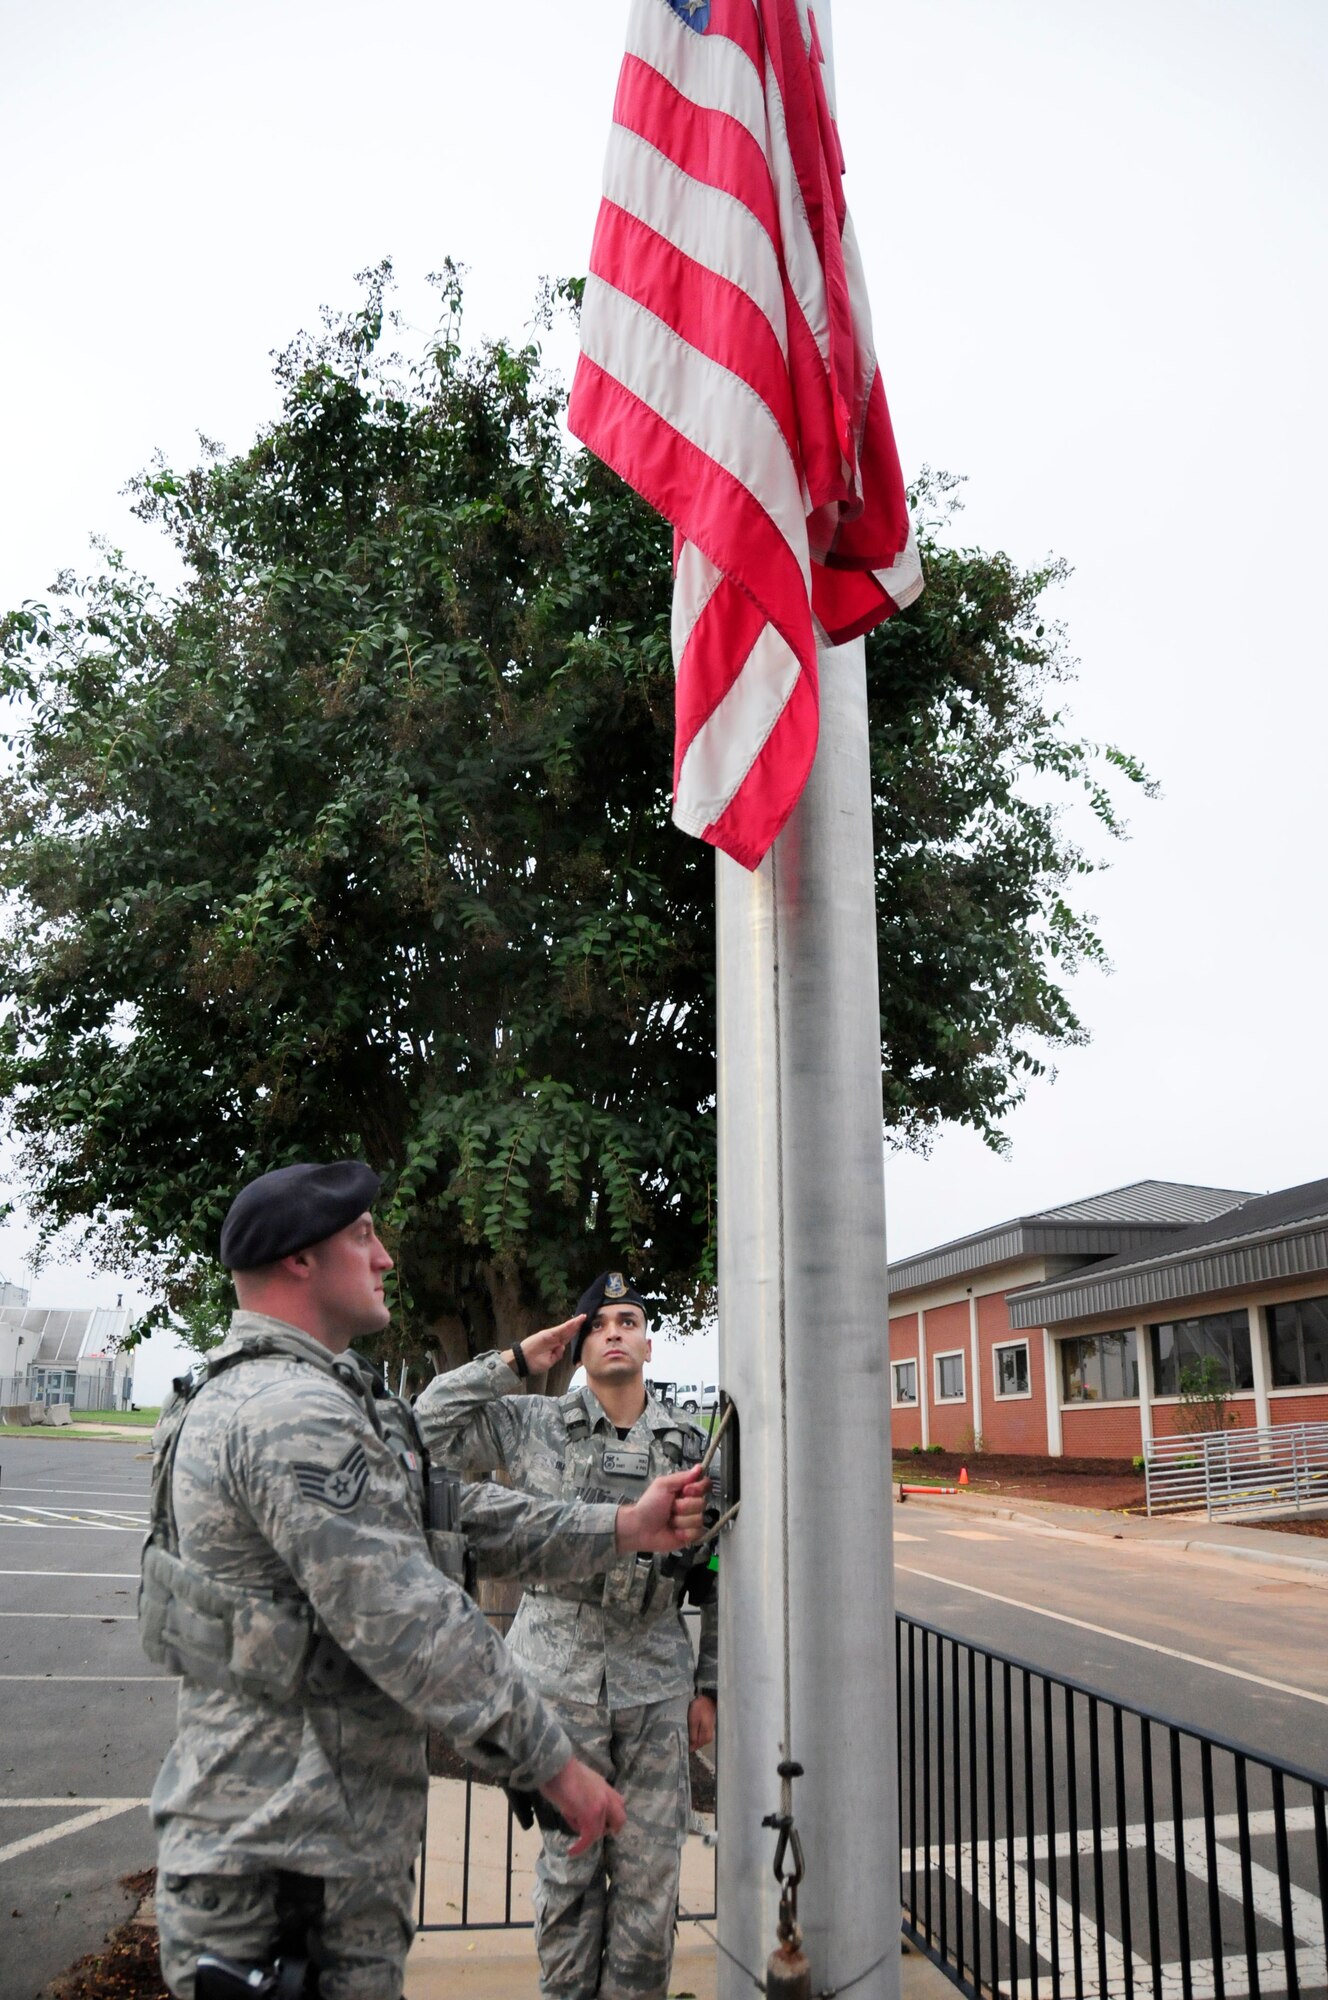 As directed by President Barack Obama, U.S. Air Force Staff Sgts. Blake Morgan and Norman Diaz, 145th Security Forces Squadron, lower the flag to half-staff at the North Carolina Air National Guard Base, Charlotte Douglas International Airport, Sept. 11, 2015. The flag will remain at half-staff until sunset in honor of those who lost their lives, 14 years ago today. (U.S. Air National Guard photo by Master Sgt. Patricia F. Moran, 145th Public Affairs/Released)